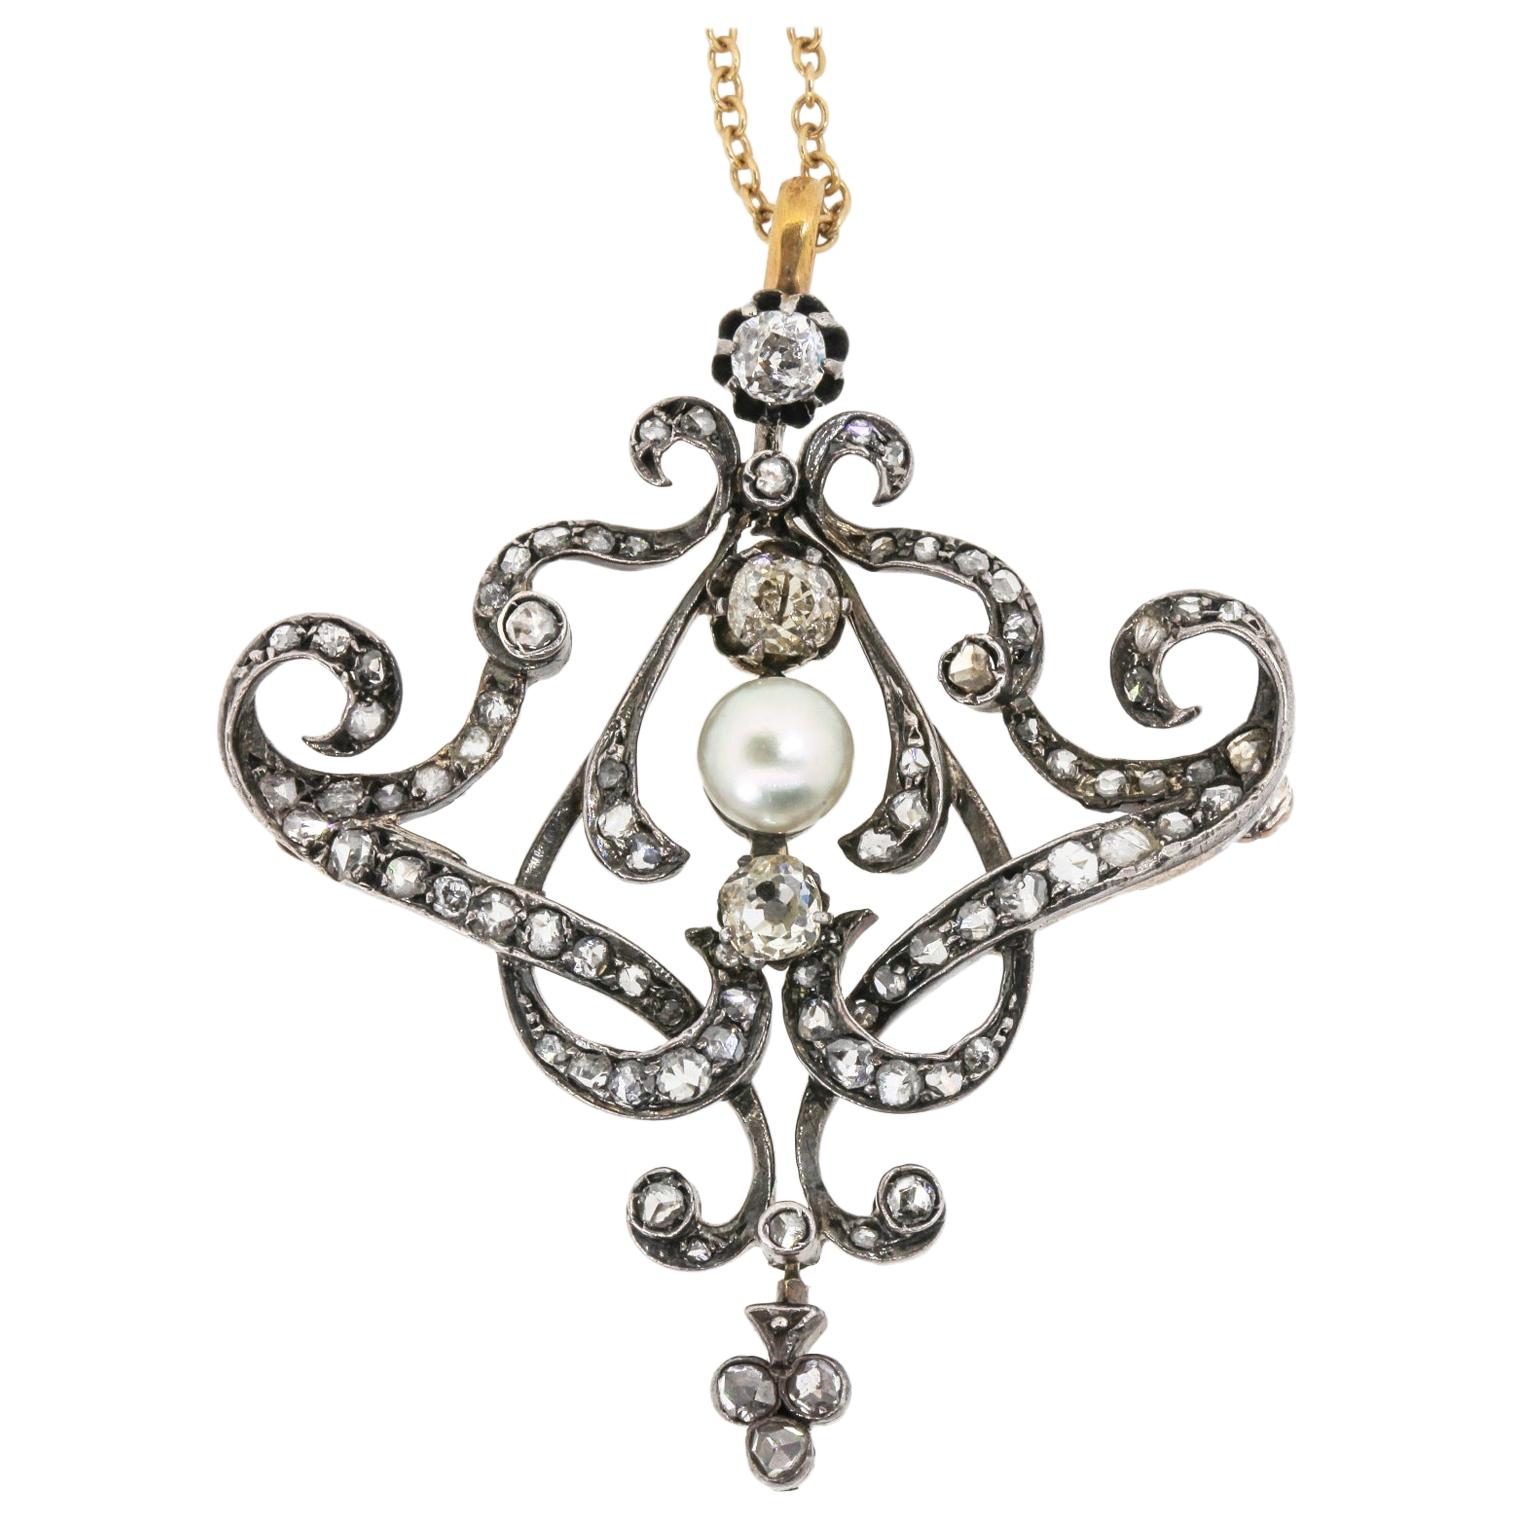 Antique 2.40 Carat Old Mind Cut Diamonds and Natural Pearl Pendant